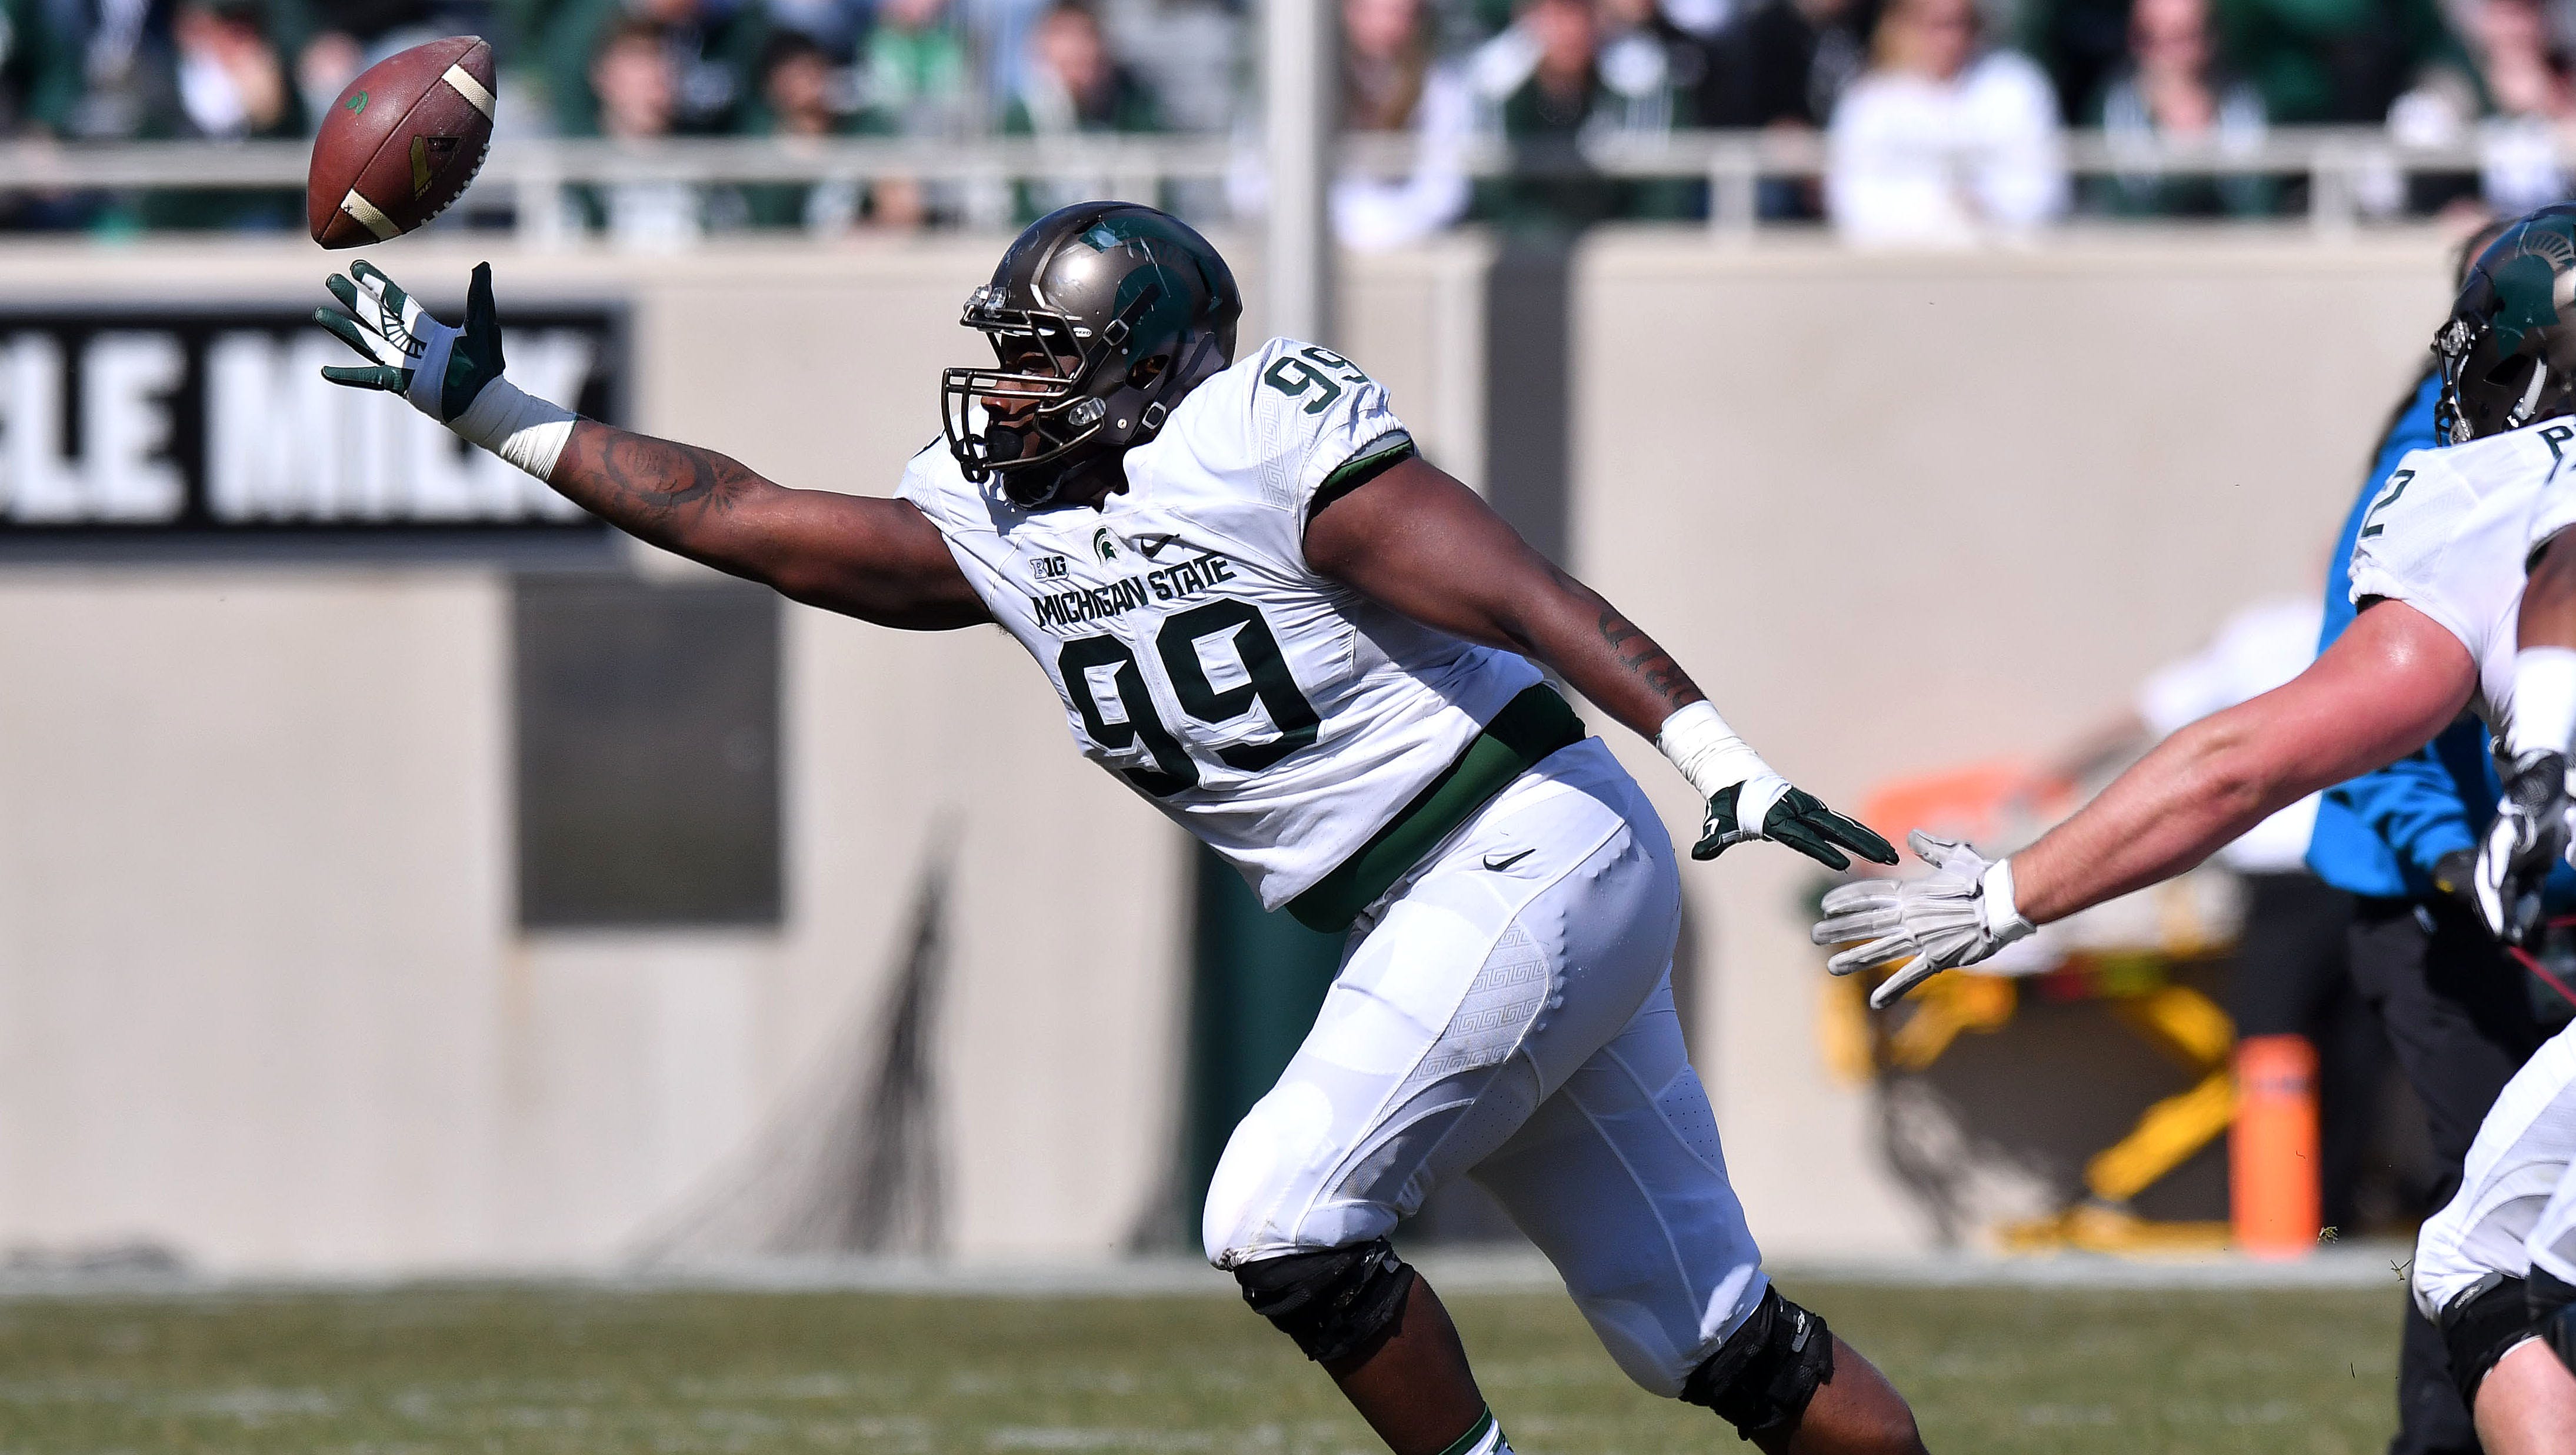 Defensive tackle – Raequan Williams, Jr. Williams has started 16 straight games and had another outstanding spring, which means he could likely improve on the honorable mention All-Big Ten honors he received last season. Senior Gerald Owens and sophomore Naquan Jones are the primary backups inside as the players will rotate with fellow starter Mike Panasiuk.